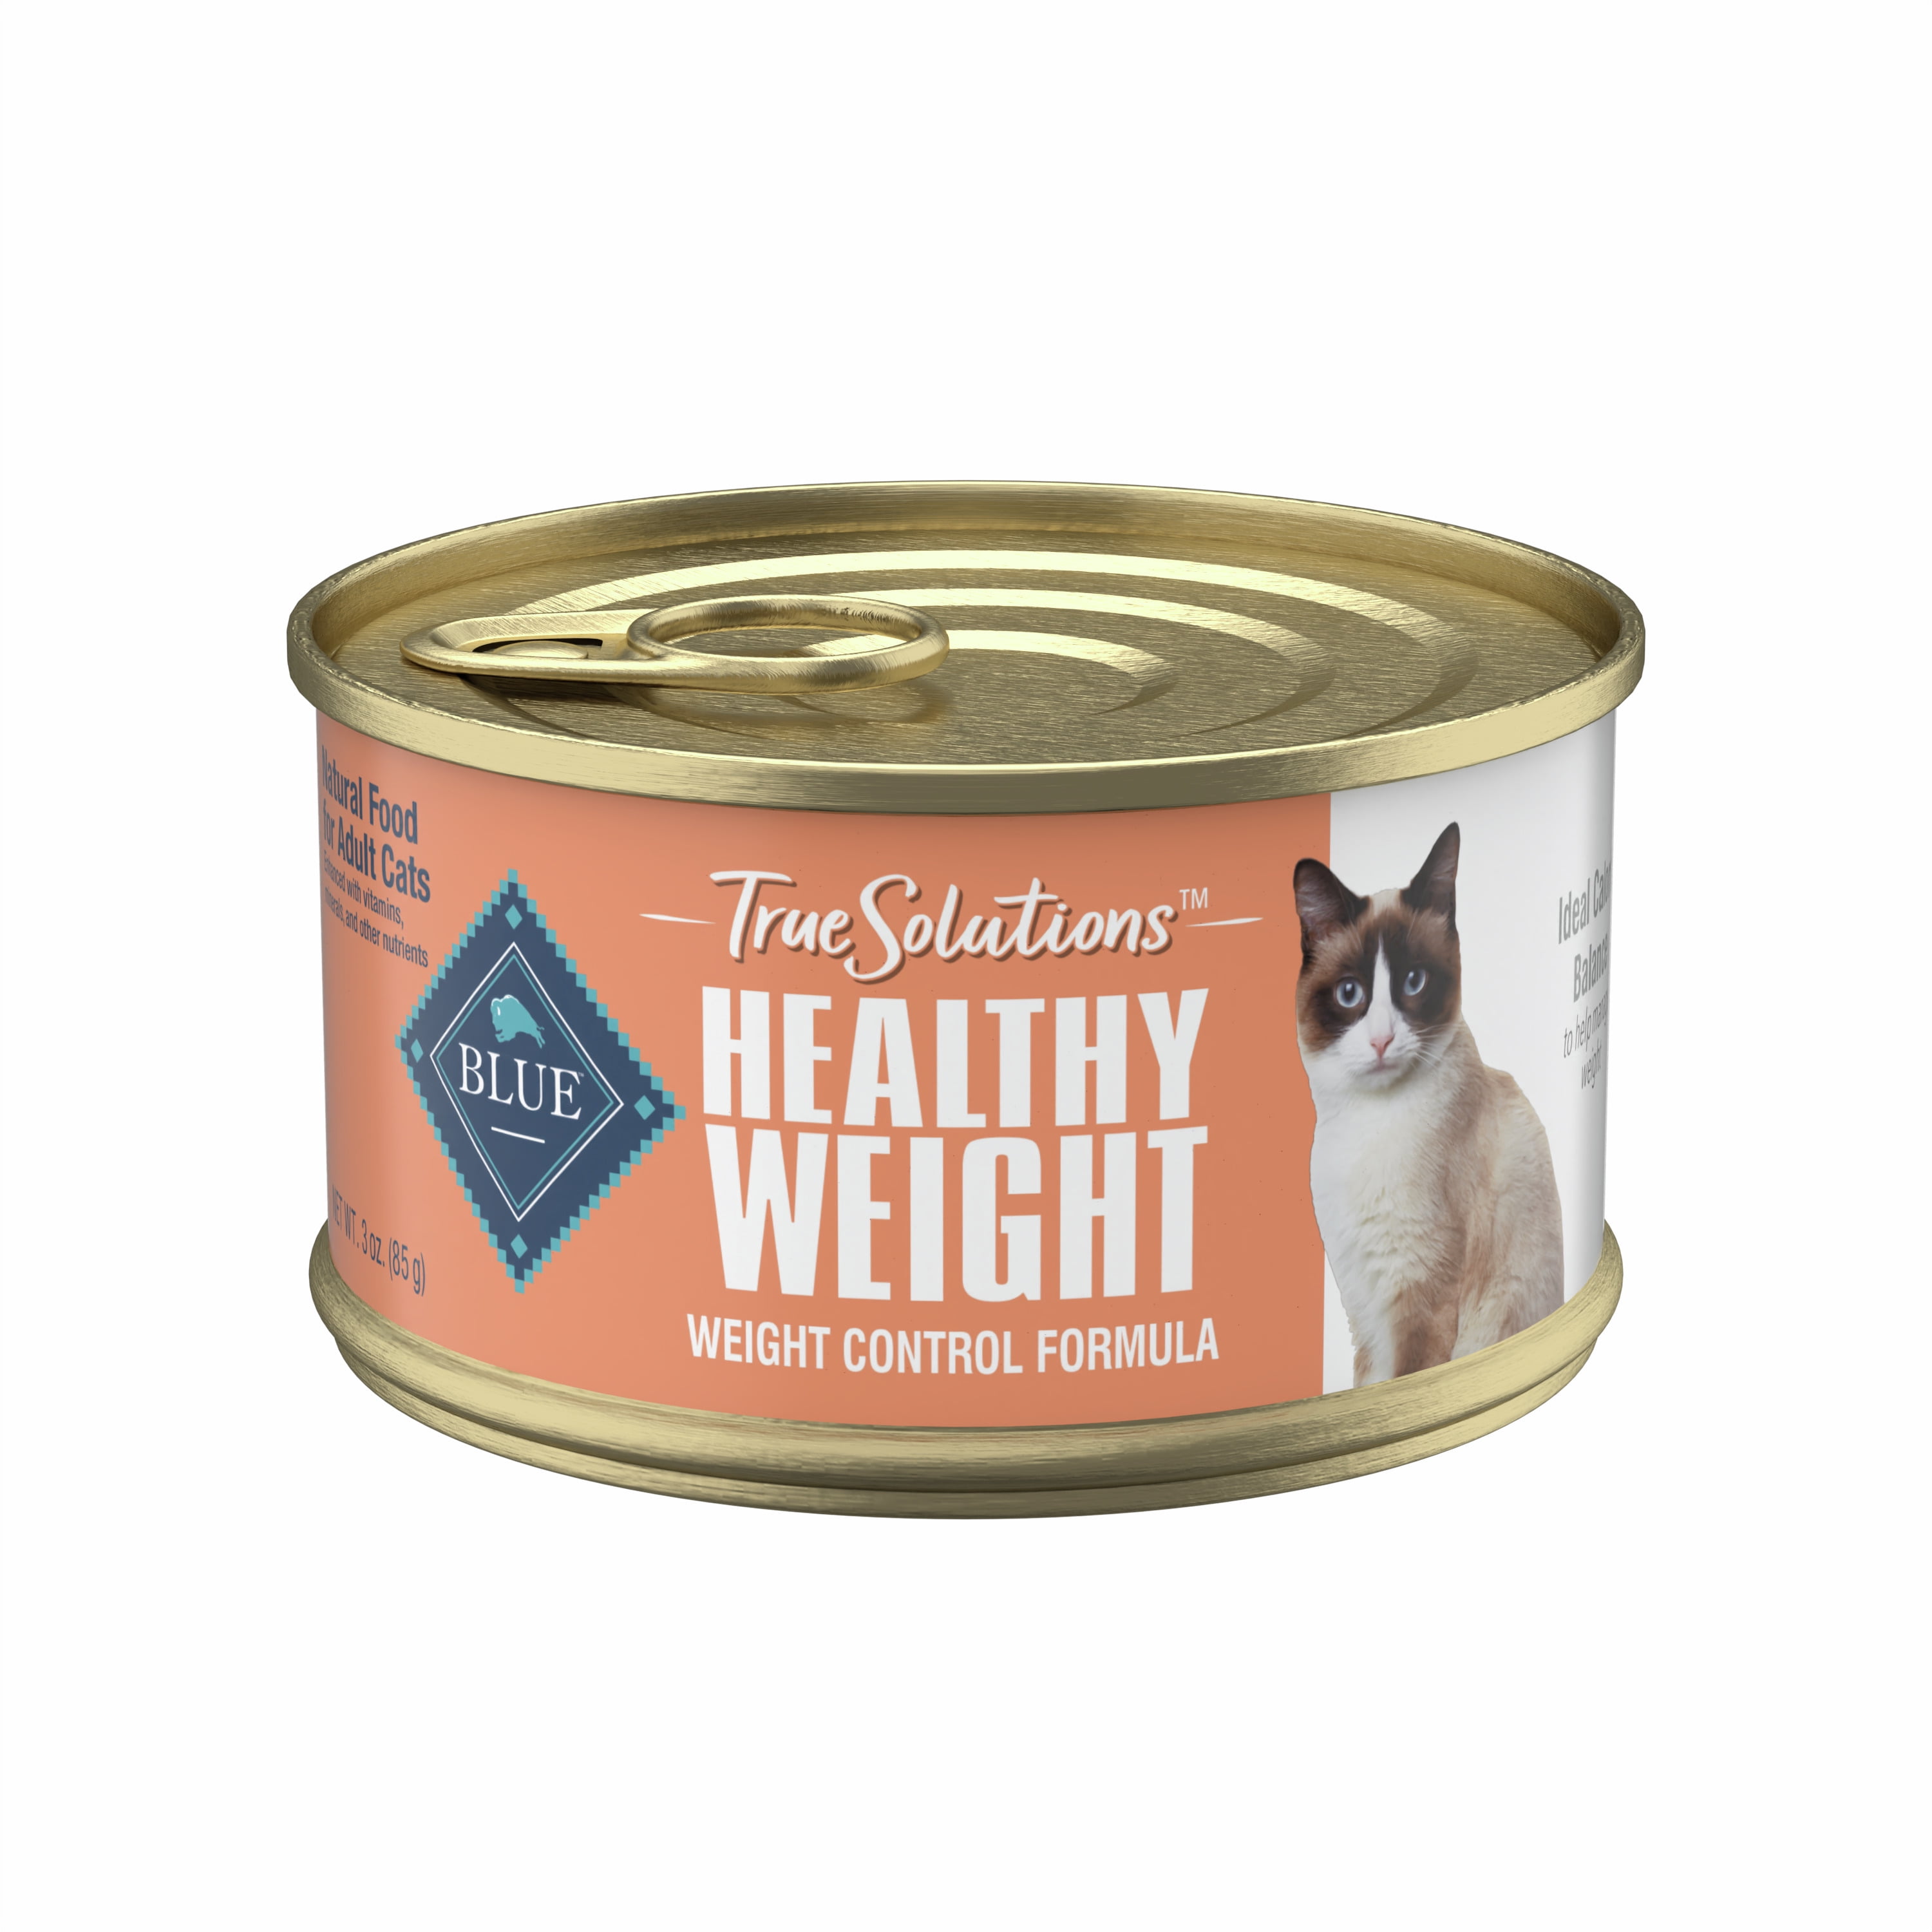 Blue Buffalo True Solutions Fit & Healthy Weight Control Chicken Pate Wet Cat Food for Adult Cats, Whole Grain, 3 oz. Can